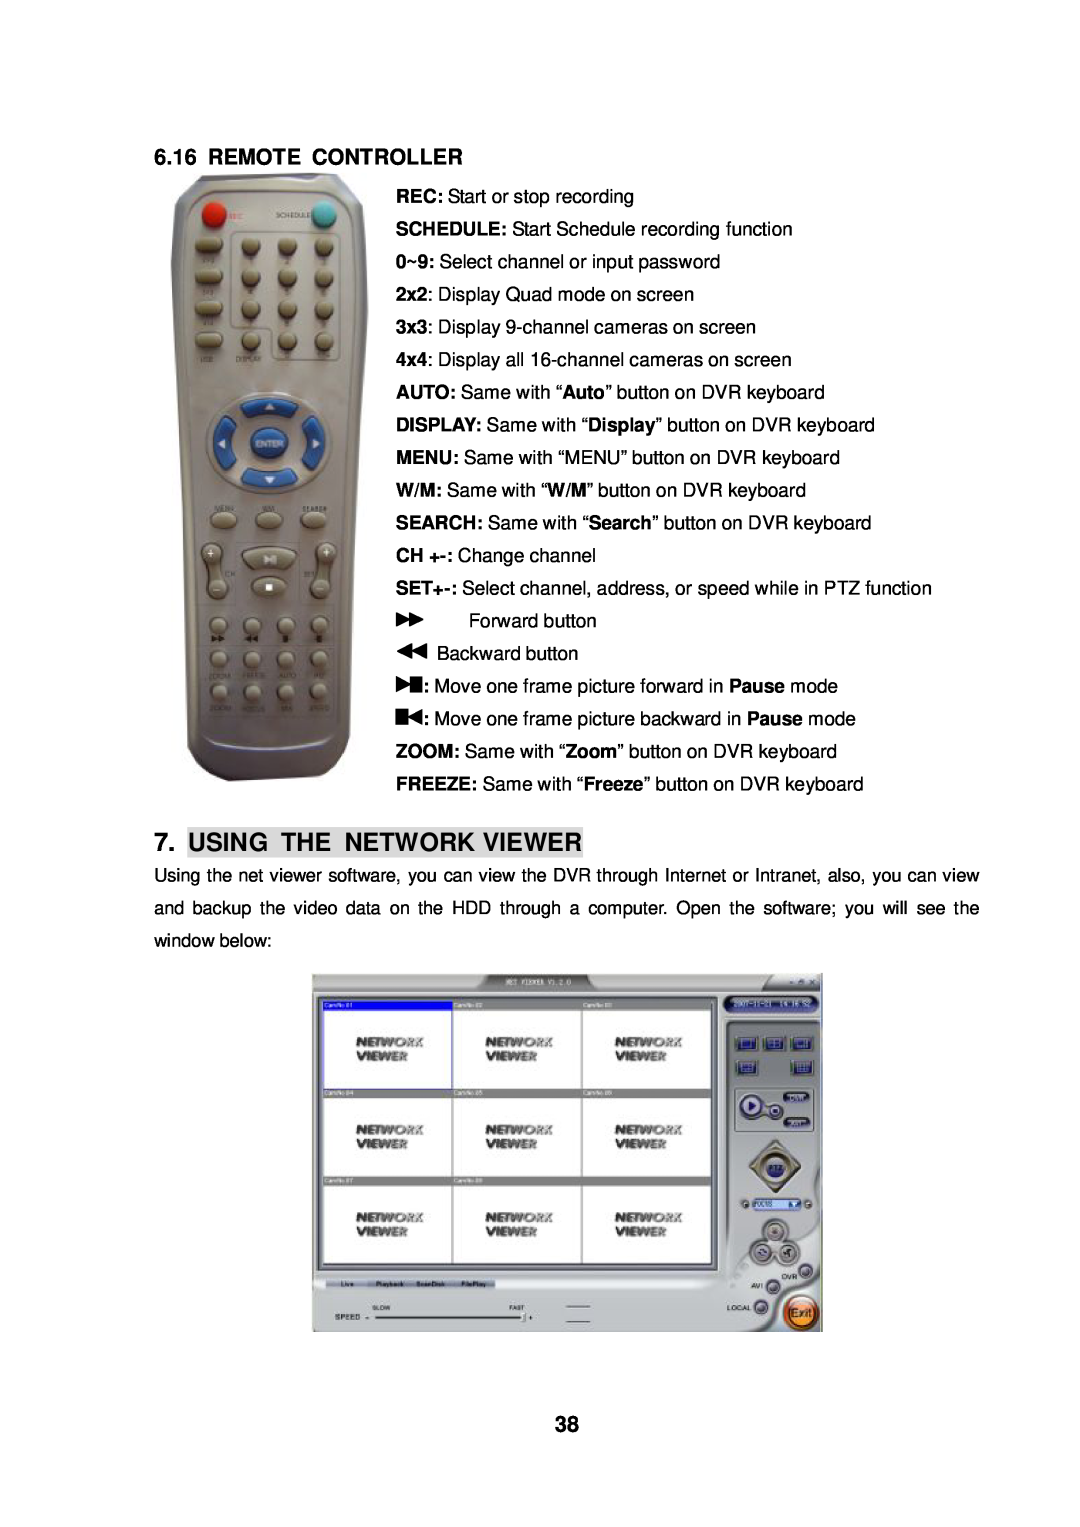 Q-See QSD2216 manual Using The Network Viewer, Remote Controller 